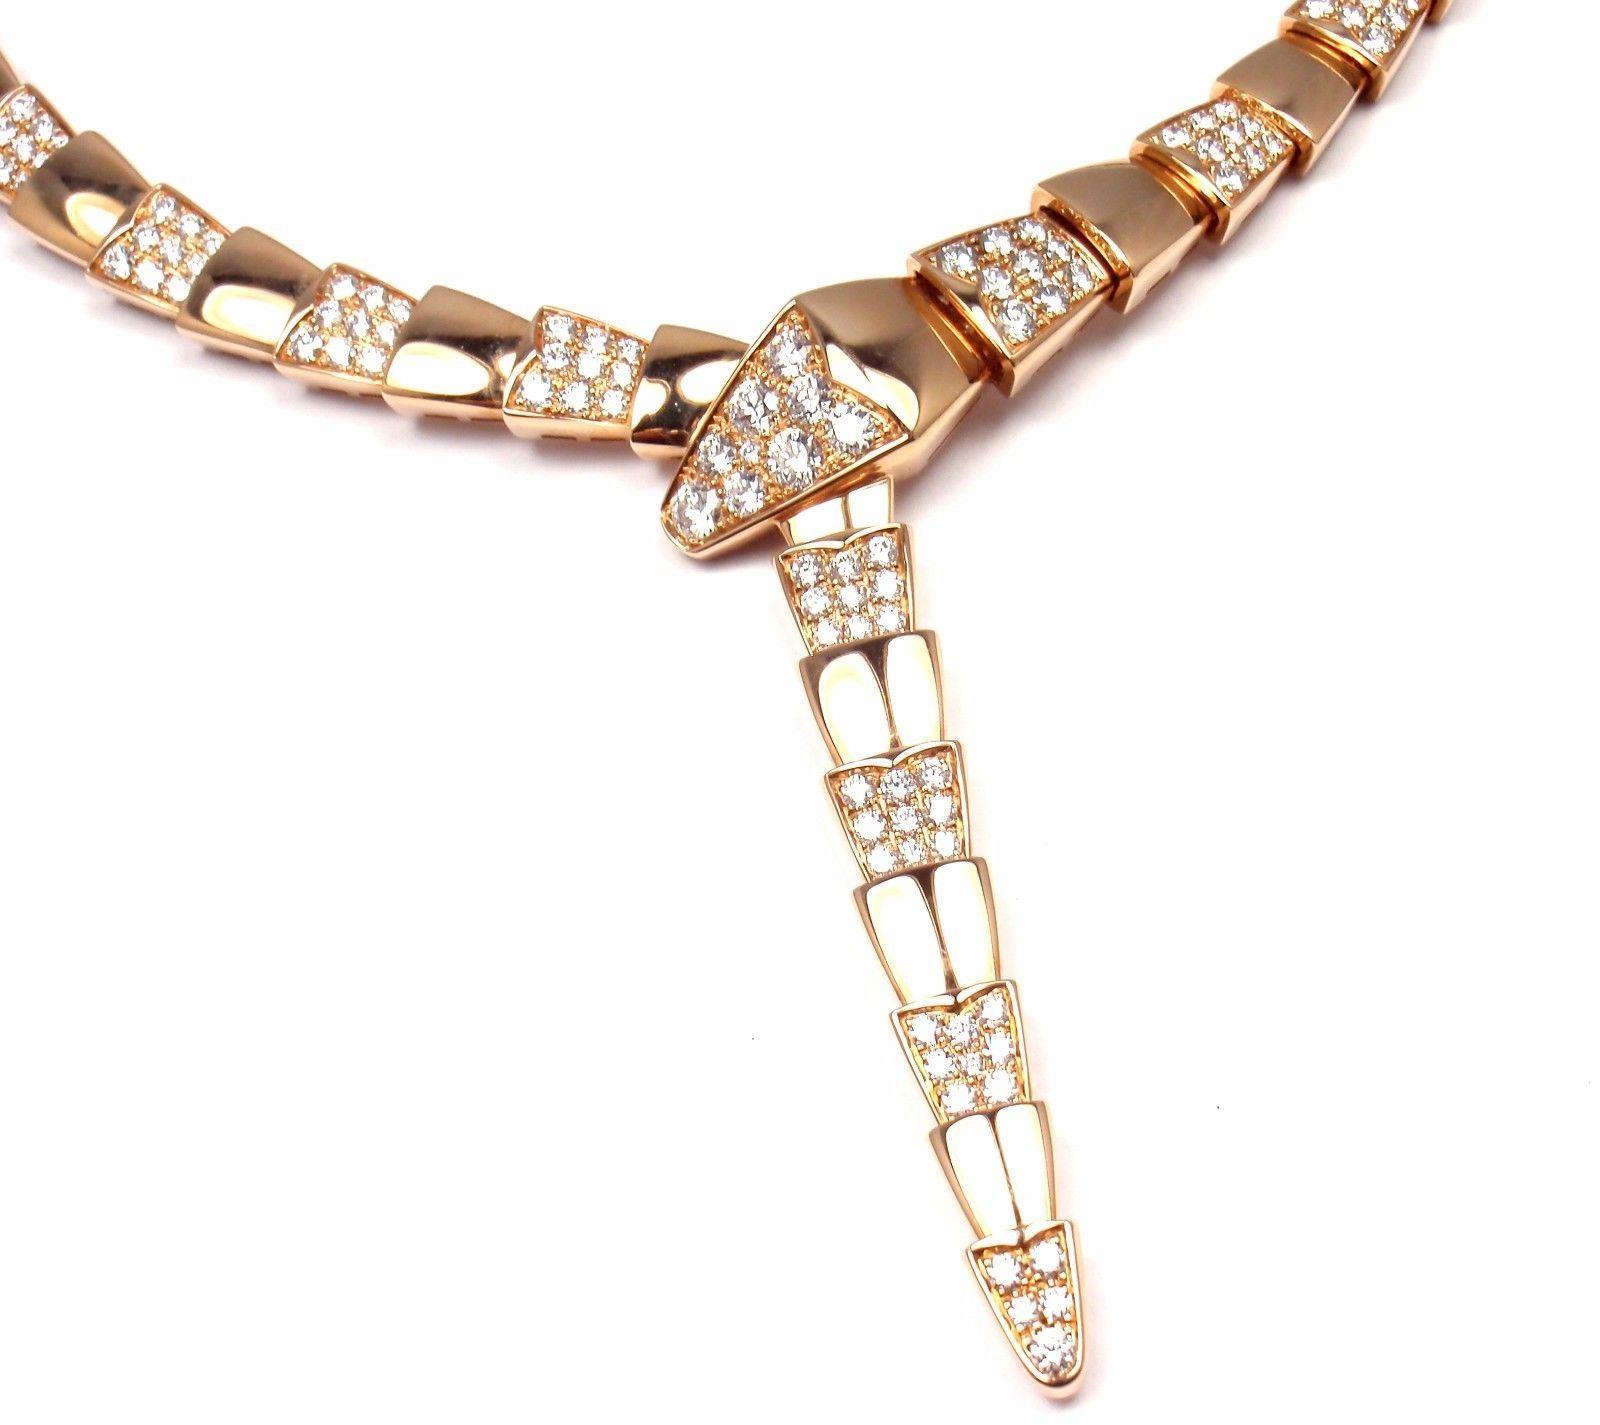 18k Rose Gold Pave Diamond Serpenti Necklace by Bulgari. 
With 283 round cut diamonds VVS1 clarity, E color.
This necklace comes with Bulgari Box, Pouch, and Authenticity Certificate.
Retail Price for this necklace is $76,000 plus